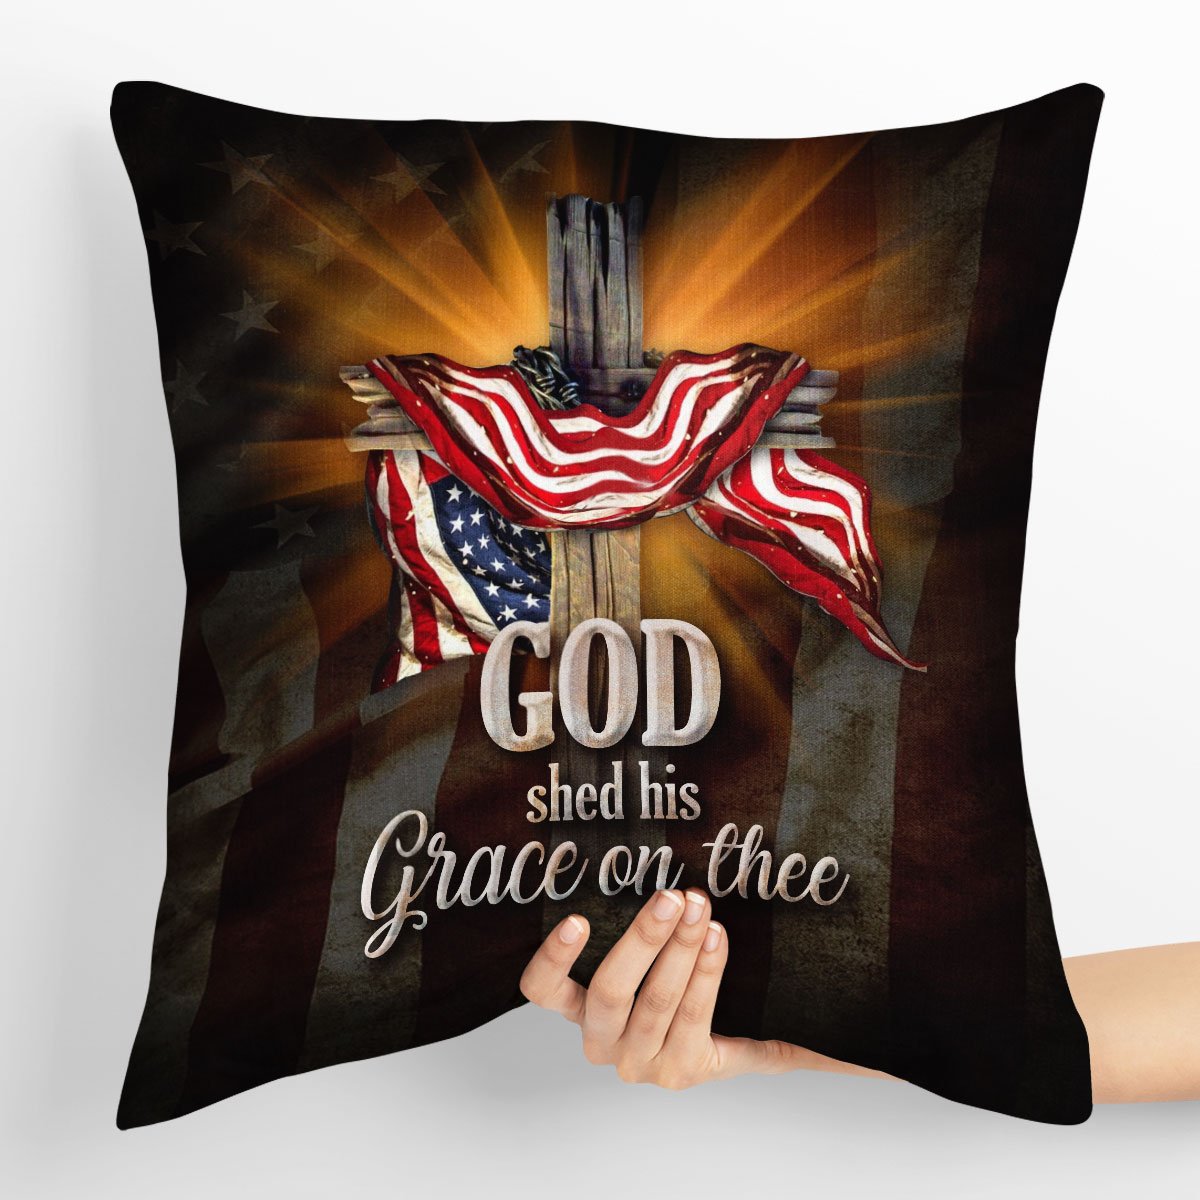 God Shed His Grace On Thee - Unique Cross And American Flag Throw Pillow HO1 - 3